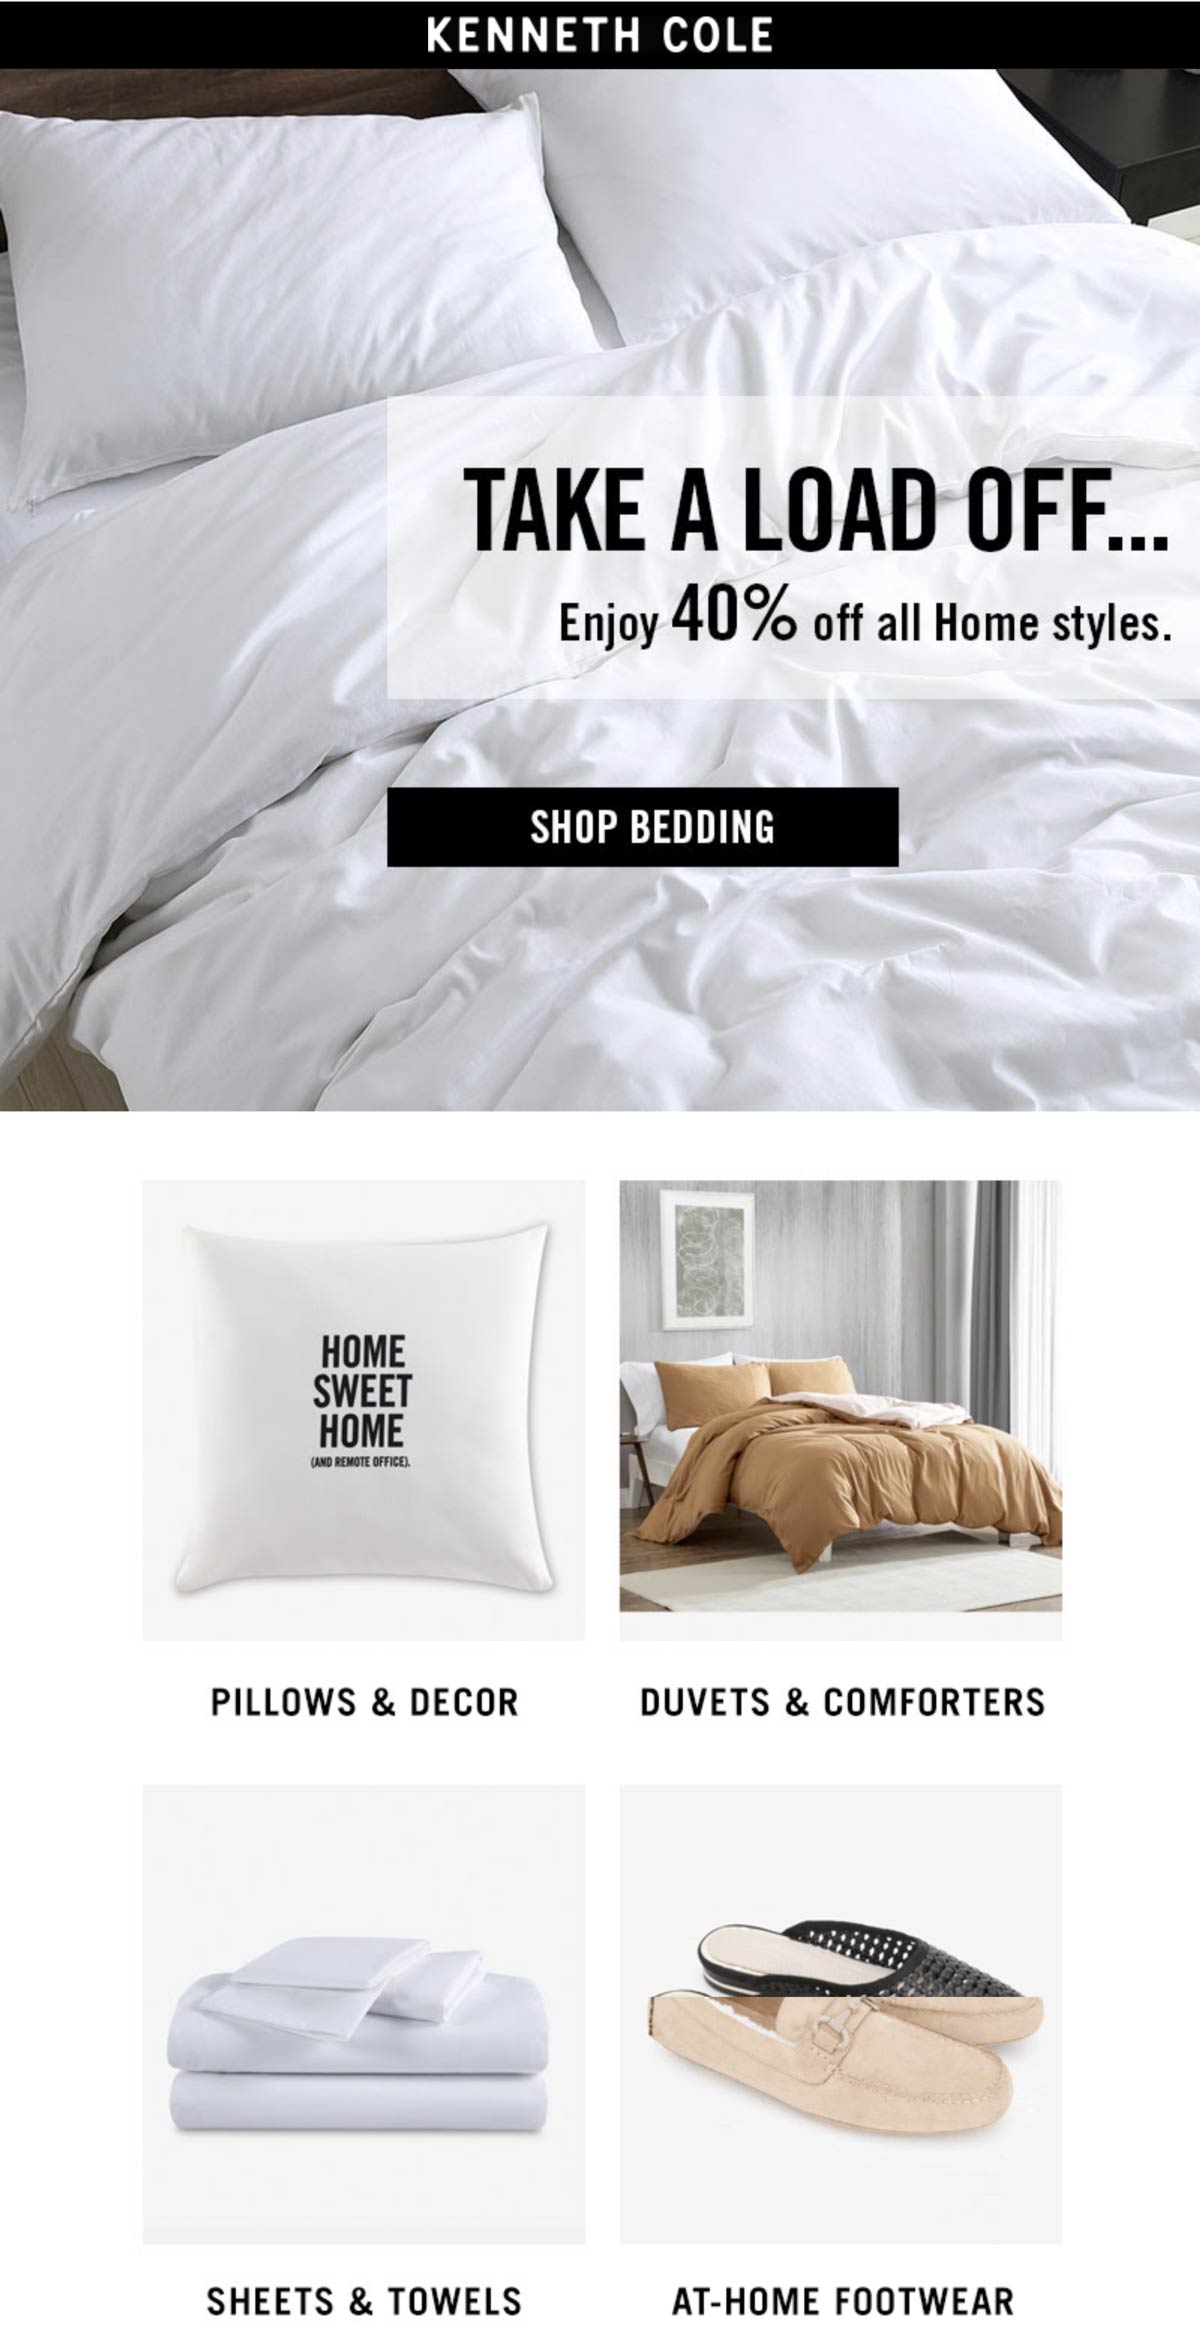 Kenneth Cole stores Coupon  40% off home styles at Kenneth Cole #kennethcole 